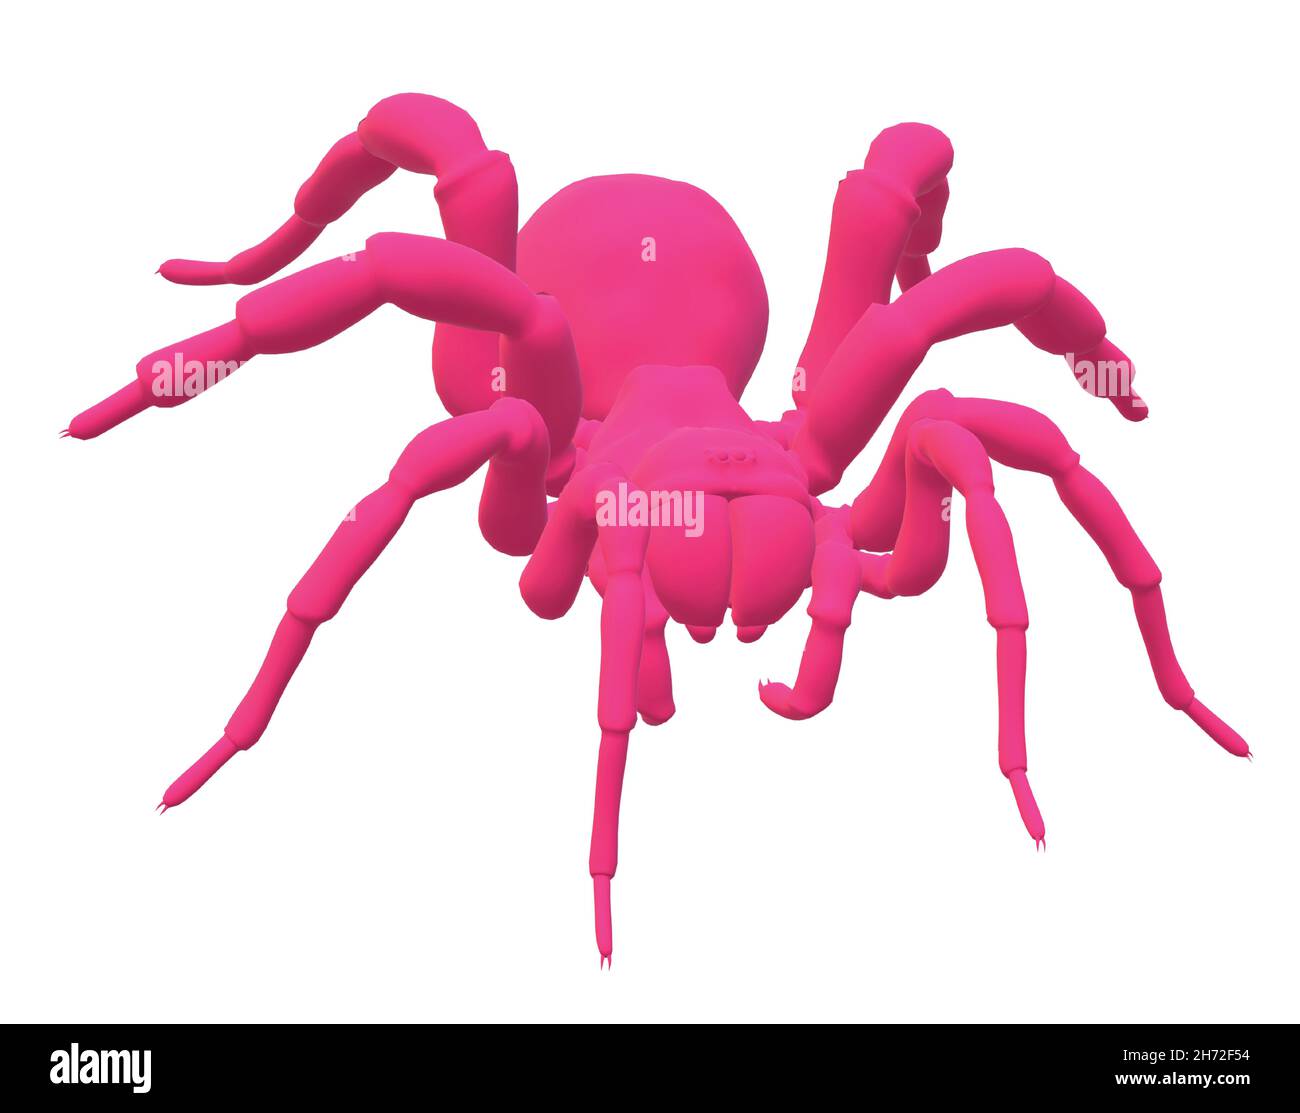 Solid Pink Colored Spider Arachnid Decoration Stock Vector